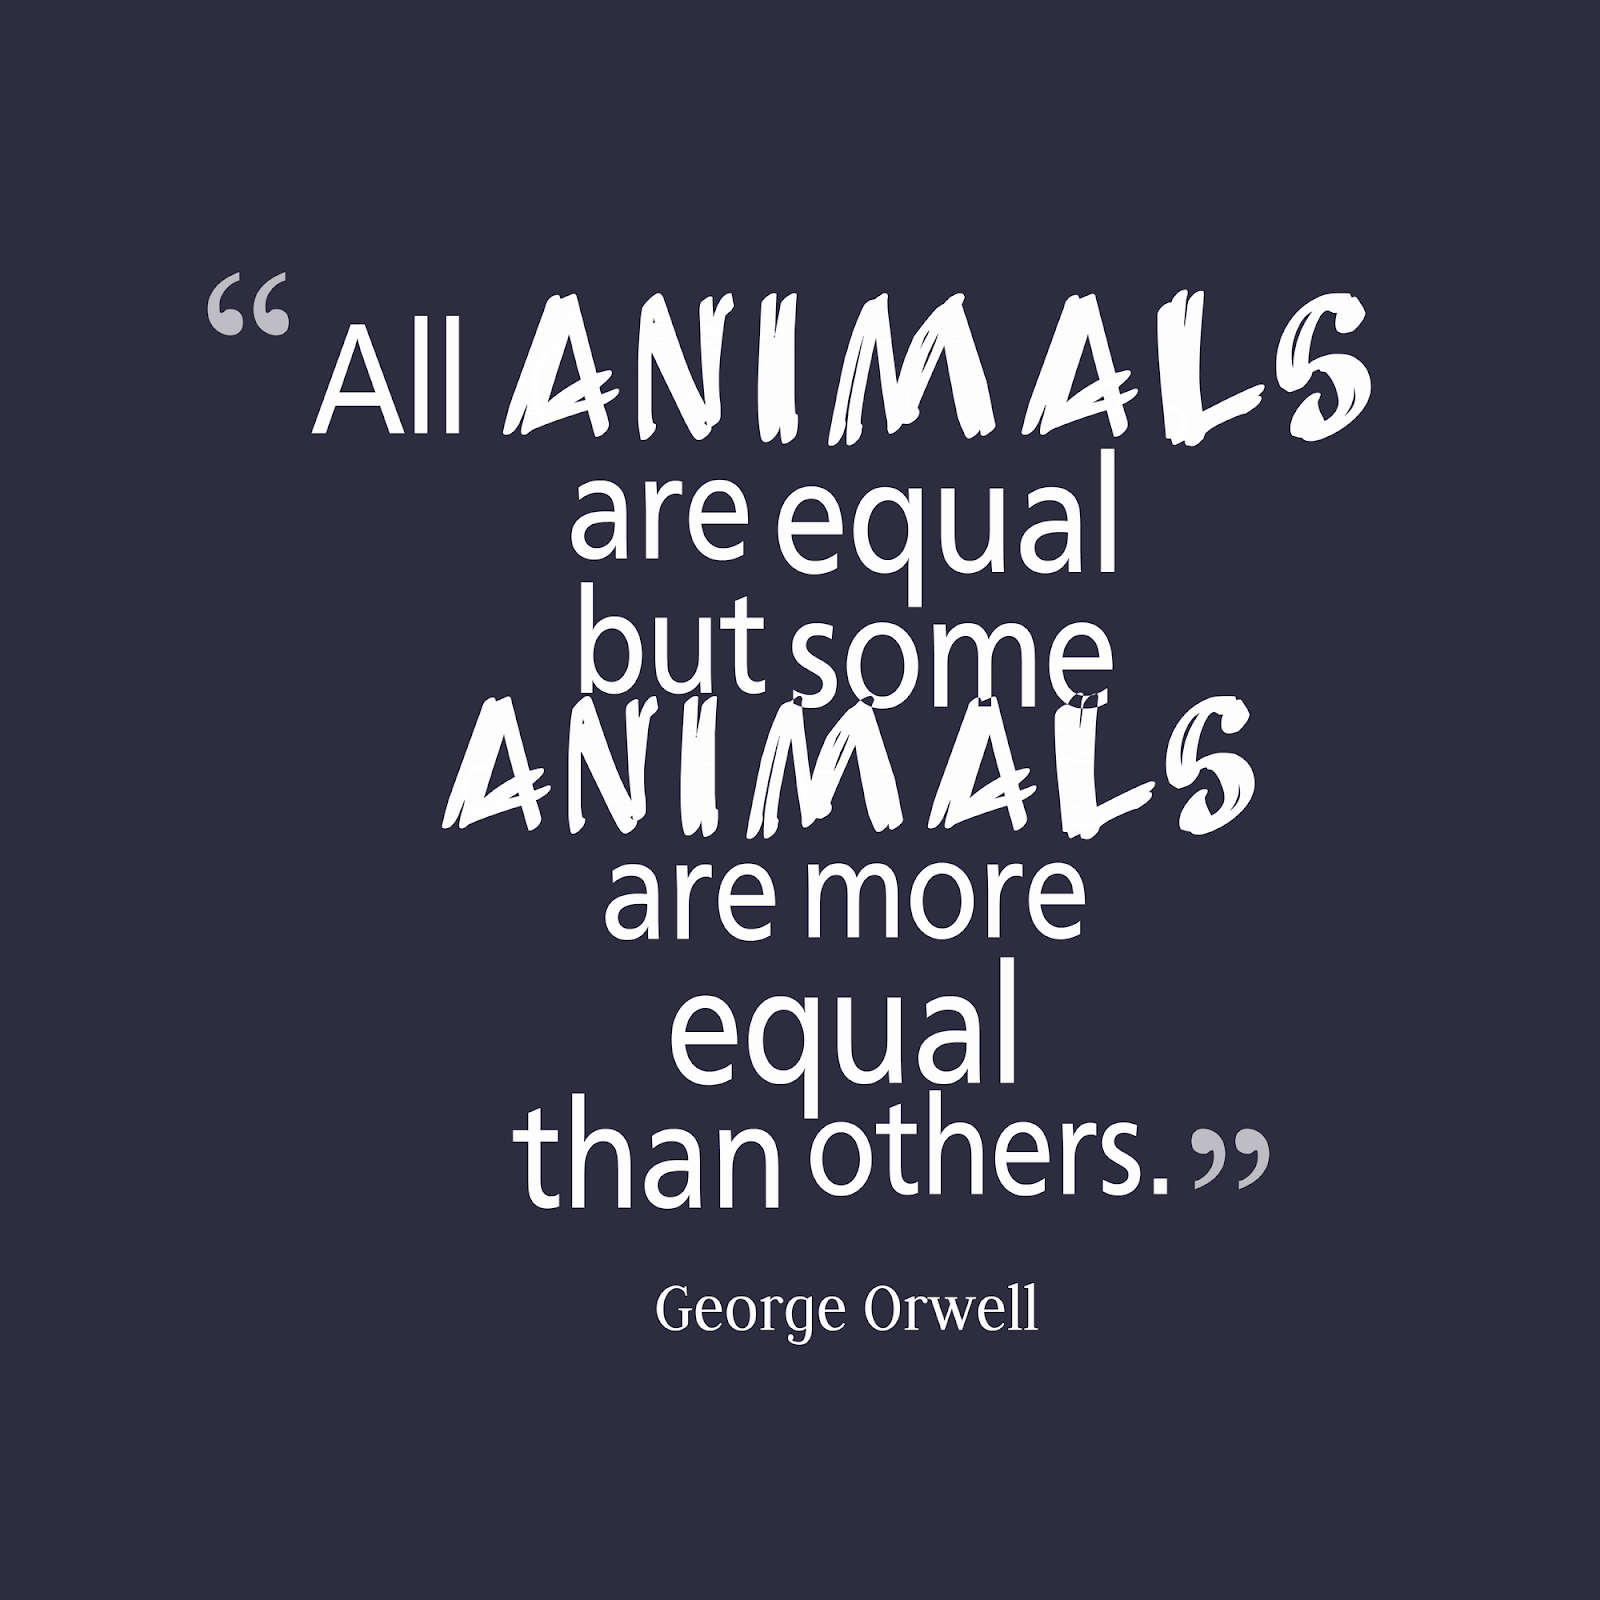 All animals are equal, but some animals are more equal than others. By -  George Orwell